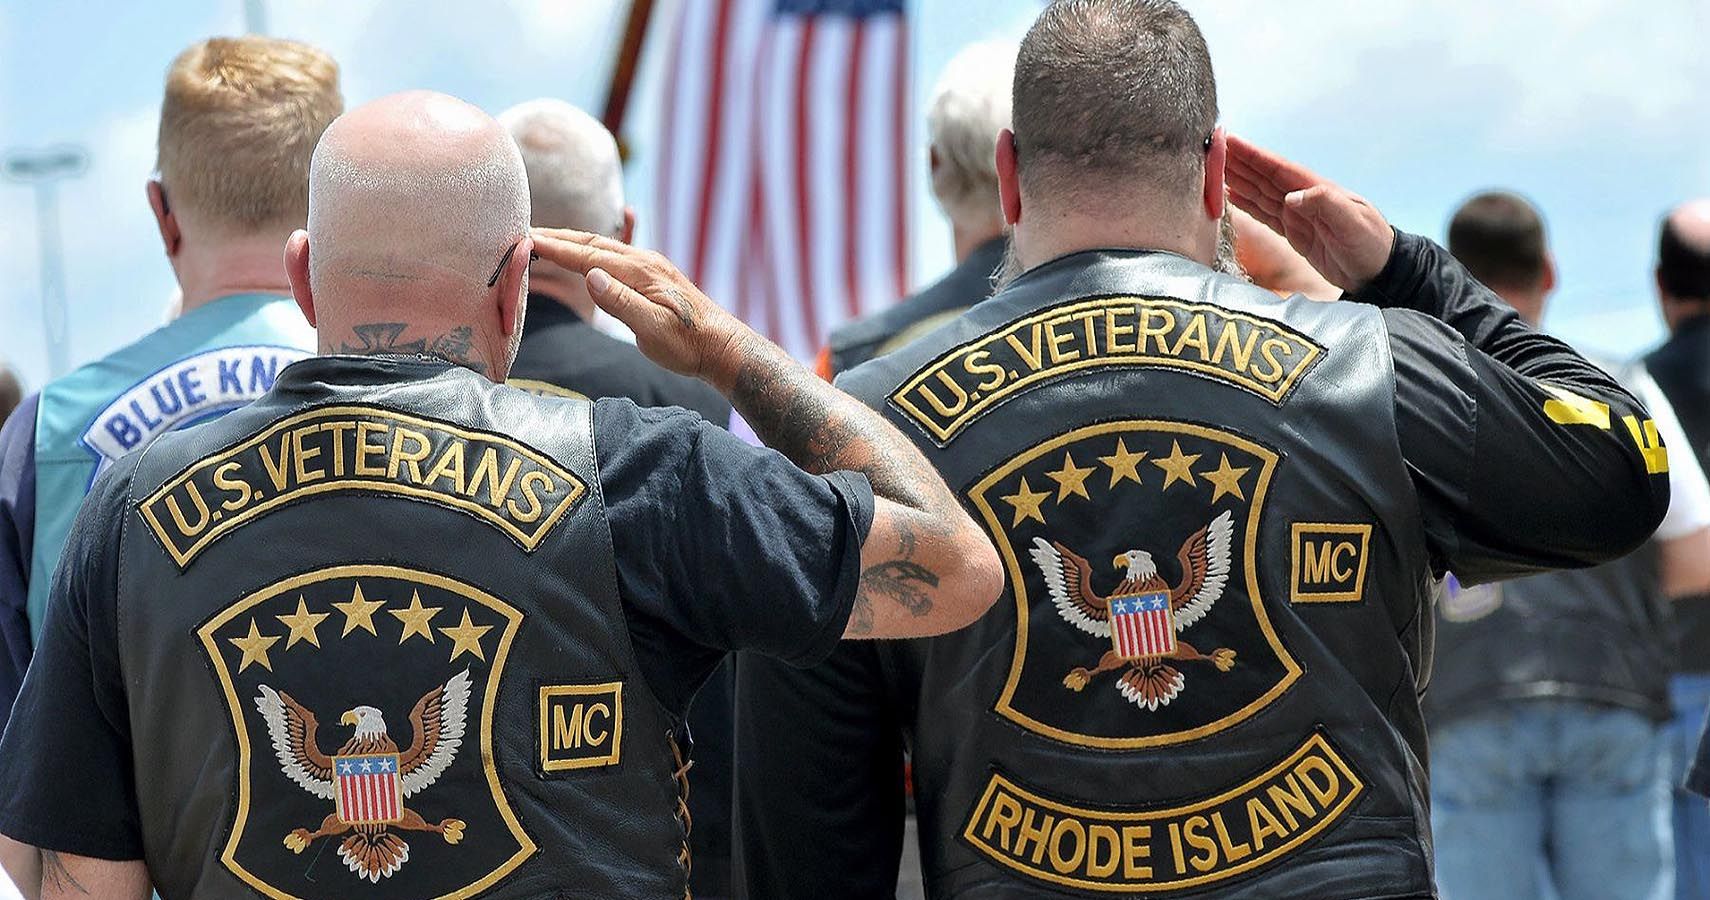 The US Veterans Motorcycle Club Honors All Vets